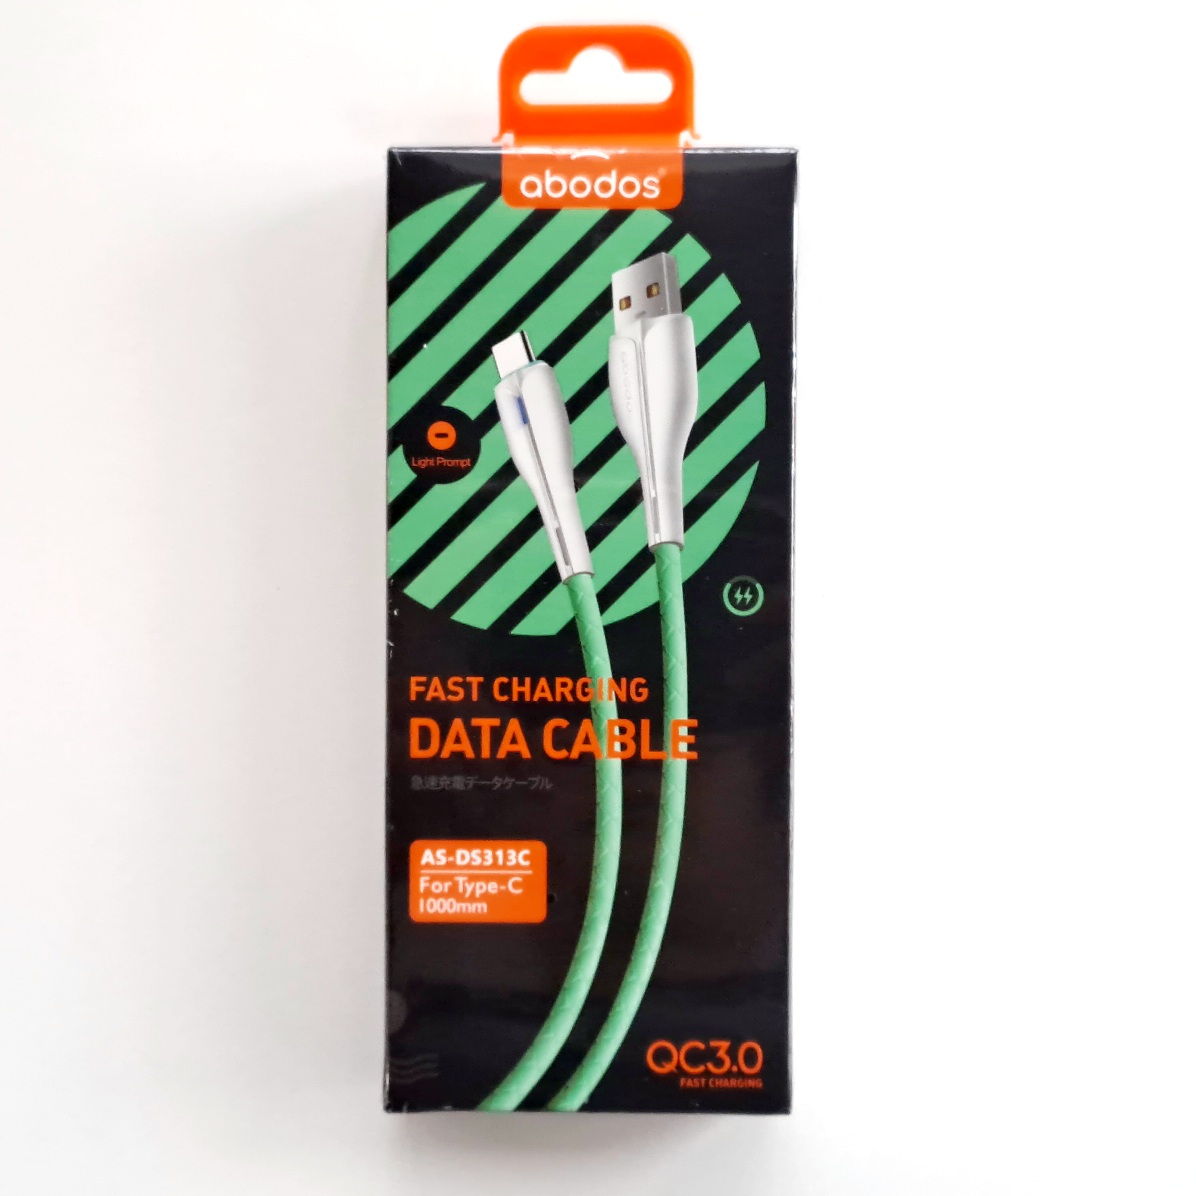 AS-DS313C abodos LED QC3.0 USB to Type C Data Cable 1m